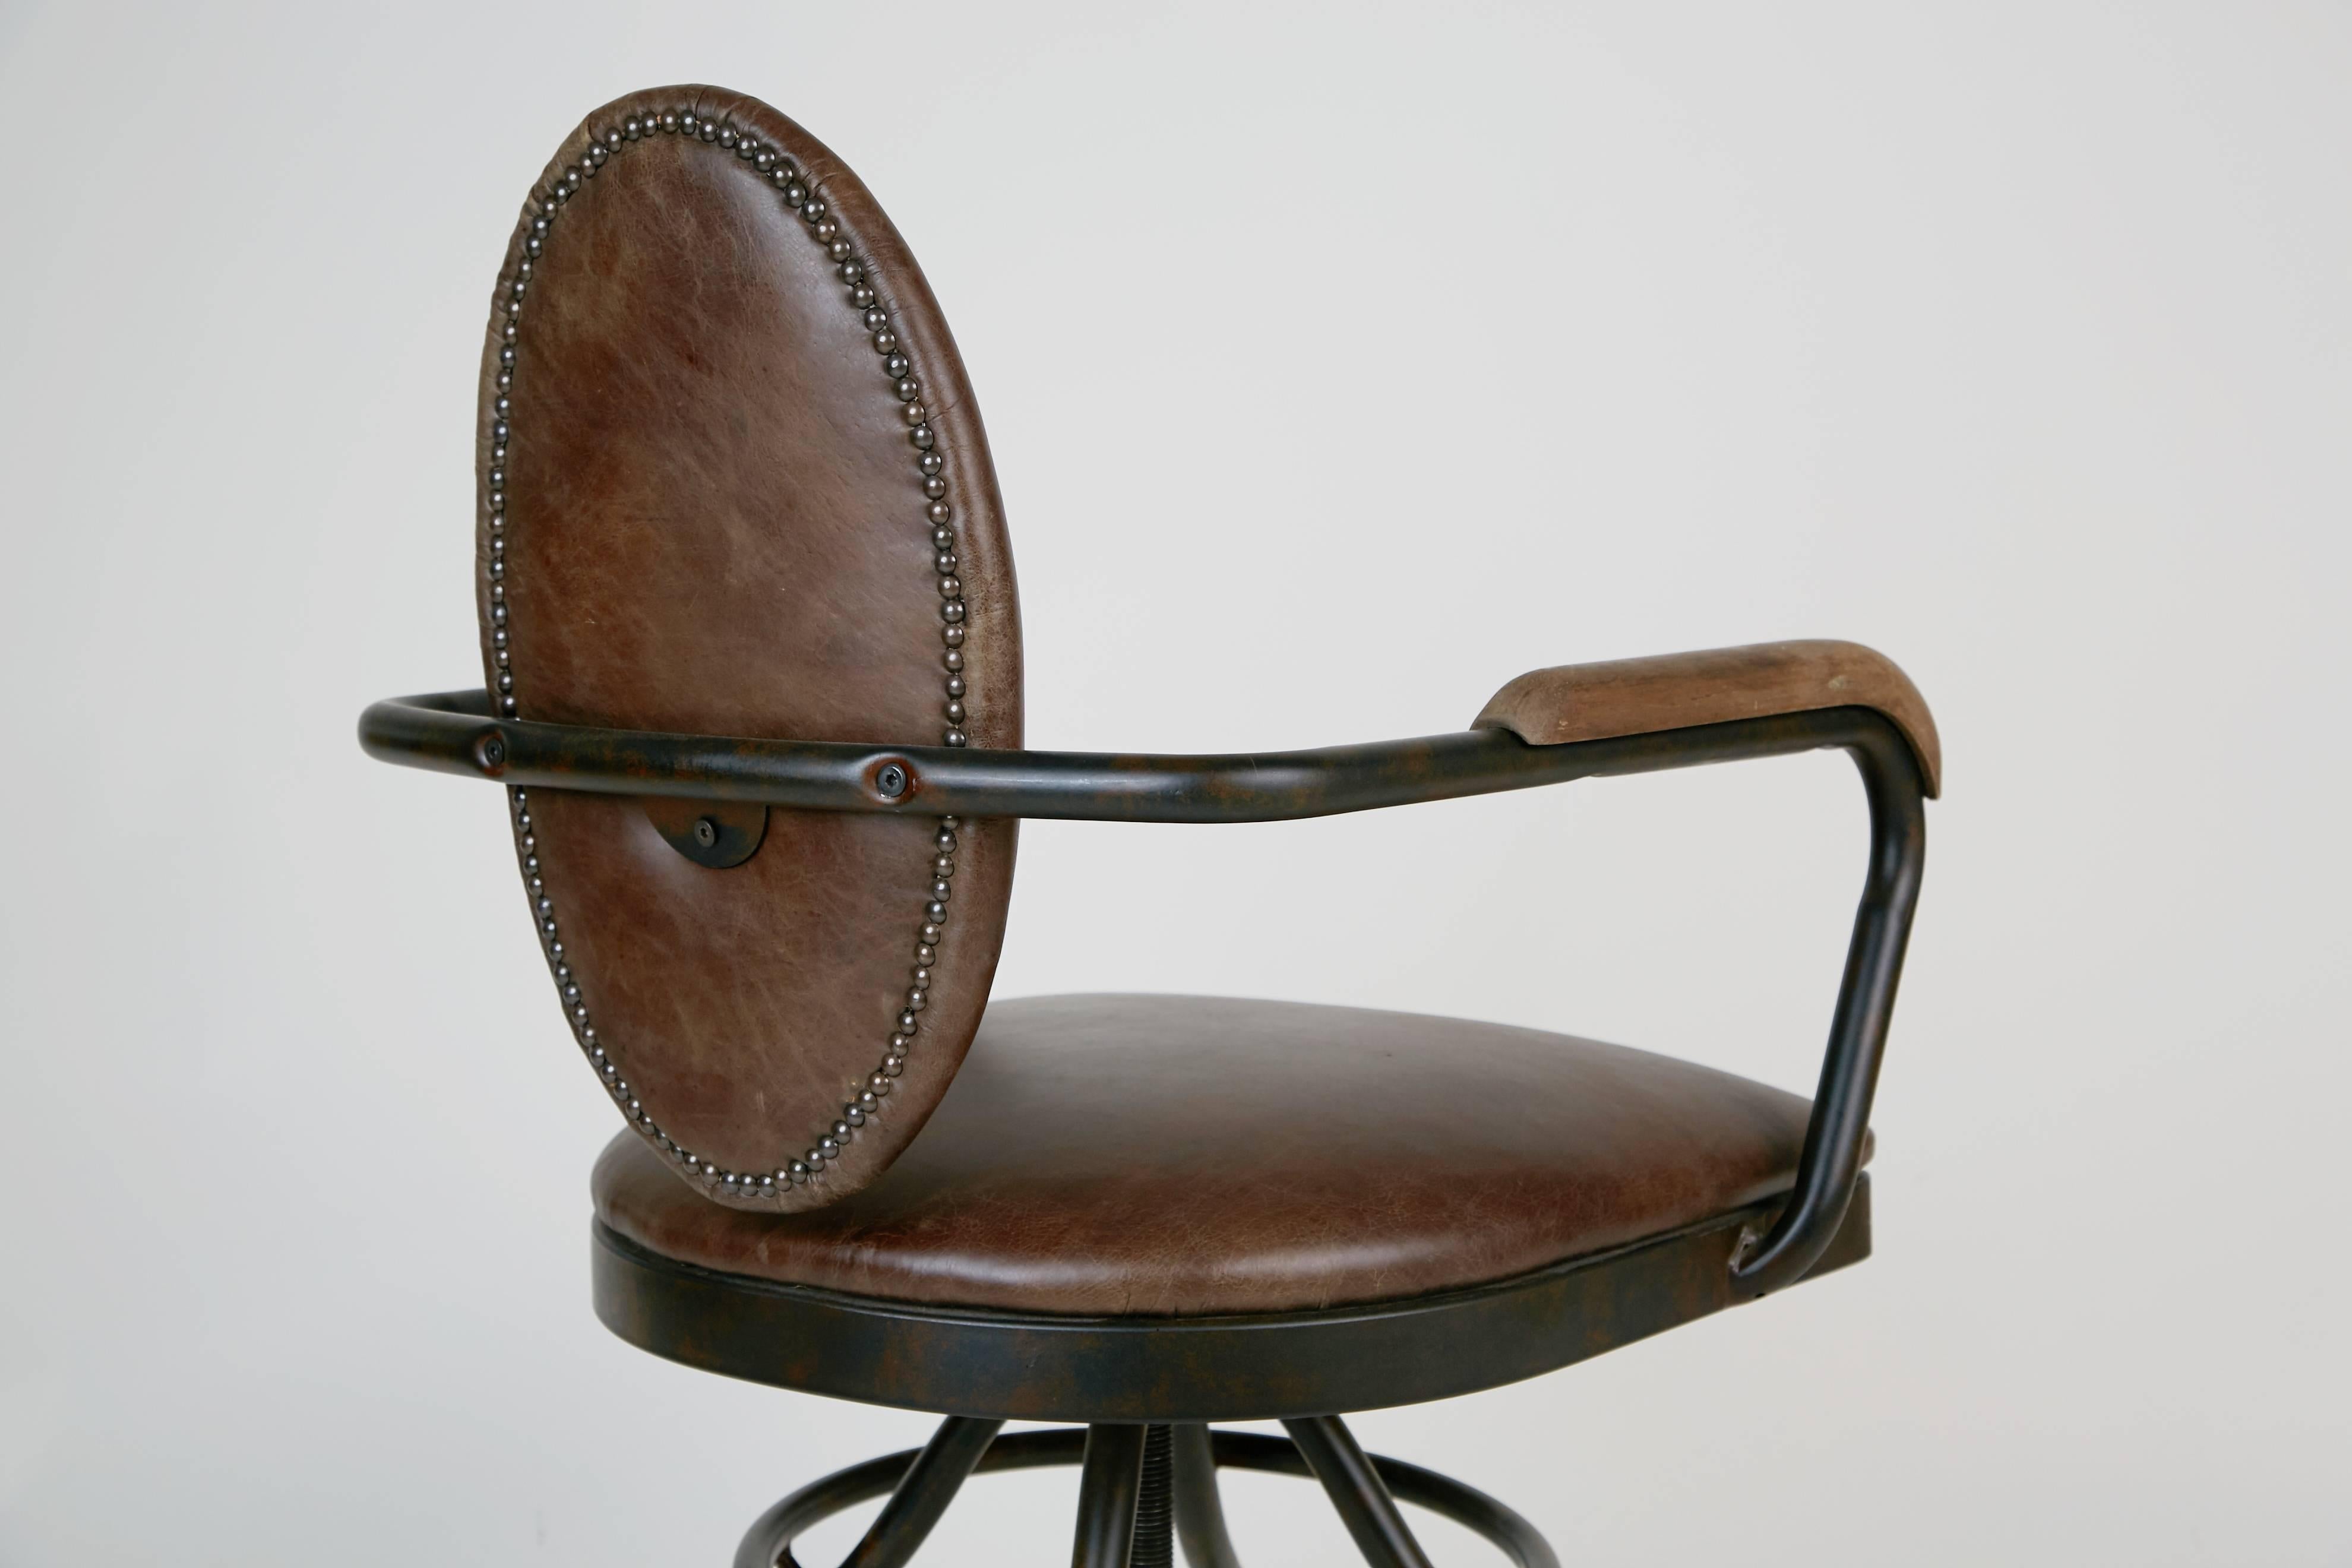 Art Deco Industrial Style Oval Back Desk Chair, circa 1930